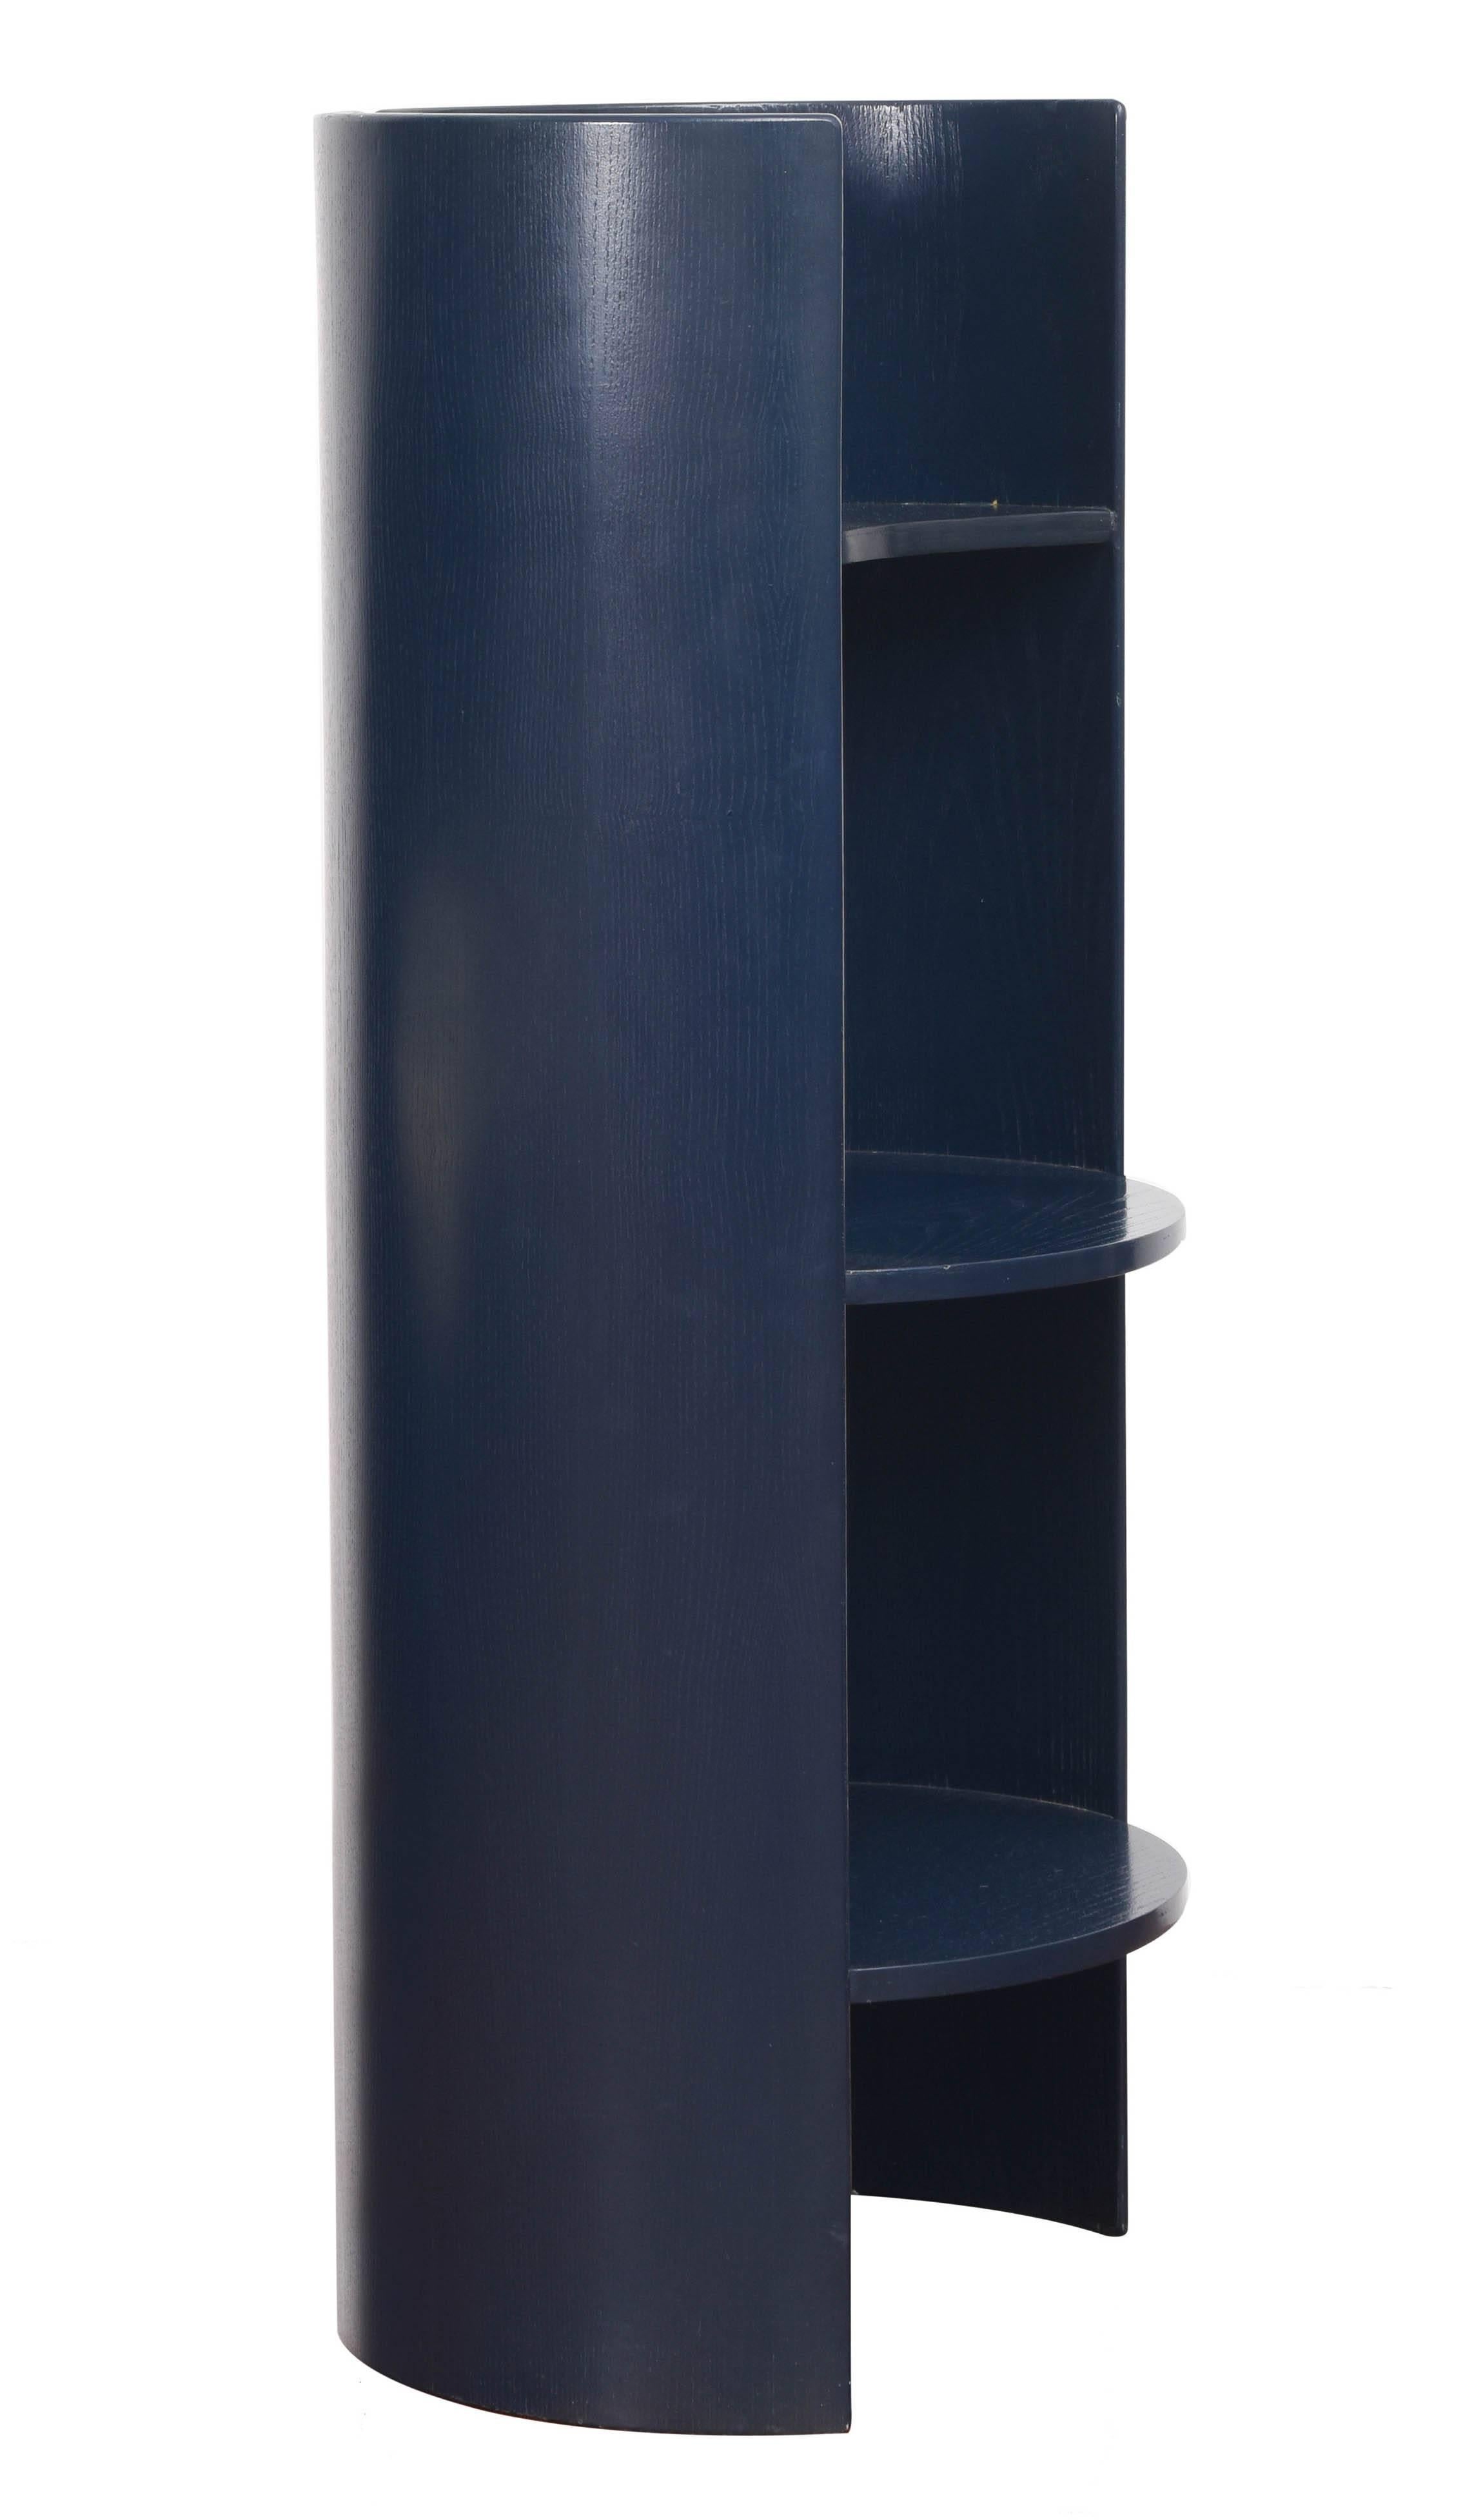 Shelving unit by Kazuhide Takahama for Gavina, 196.  Satin finish blue colored lacquer over bentwood.